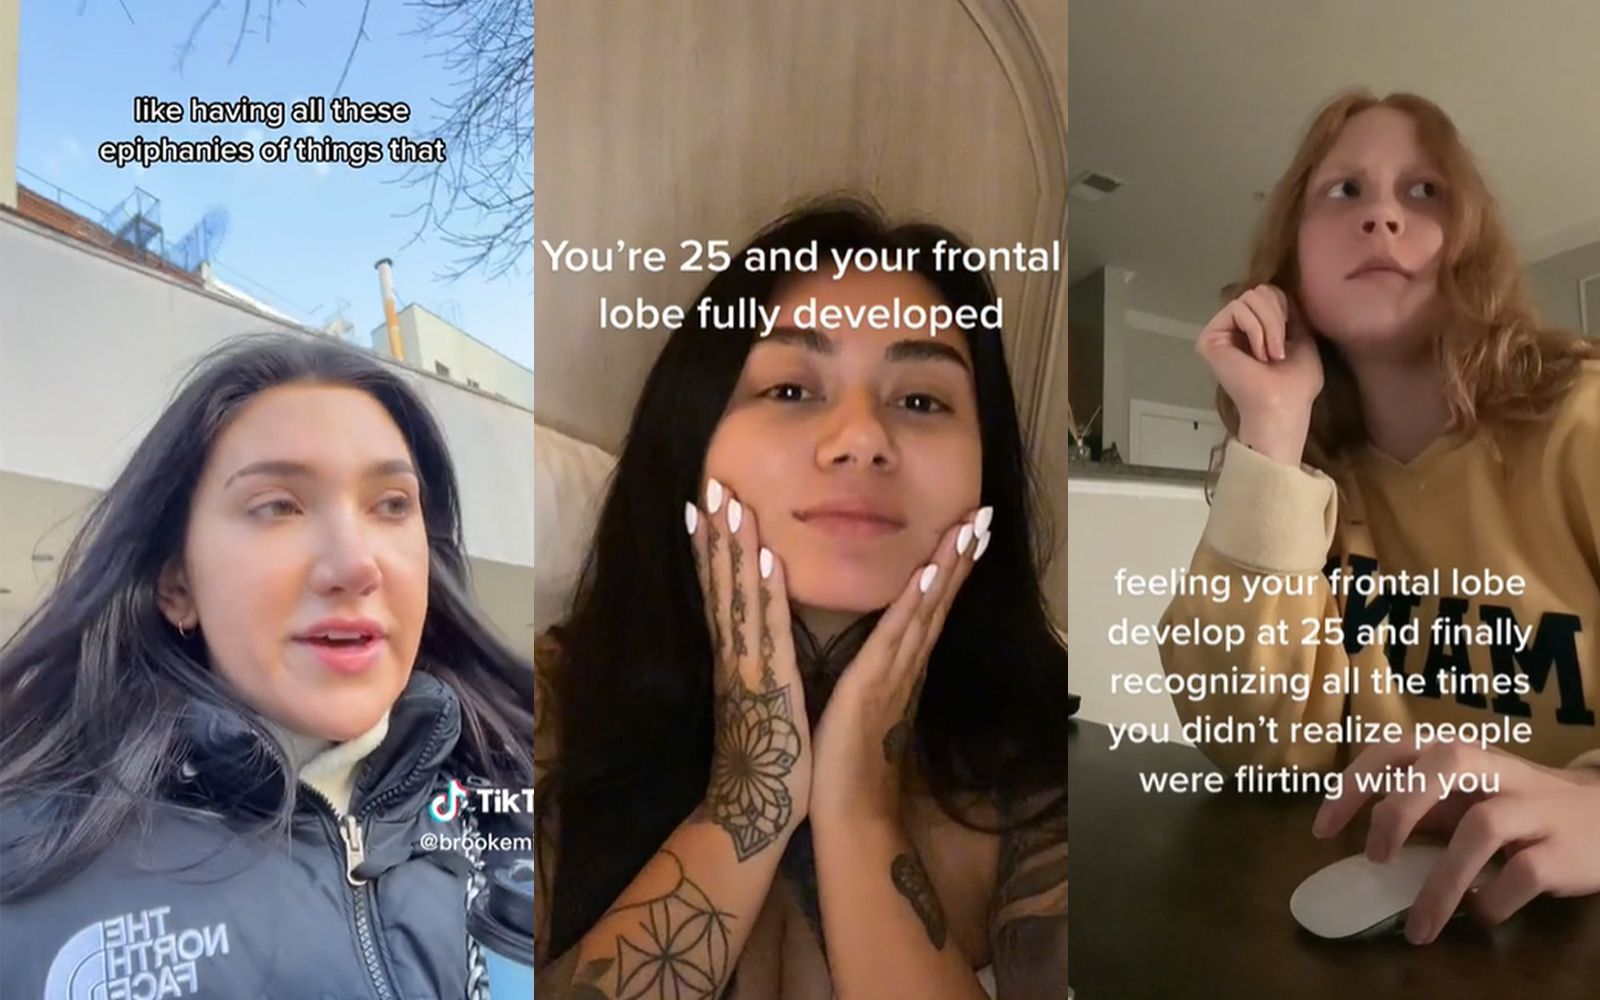 Do we really need to worry about frontal lobe growth after the age of 25? On TikTok, the #frontallobe hashtag has millions of views spreading the illusion that 25 is the age of maturity